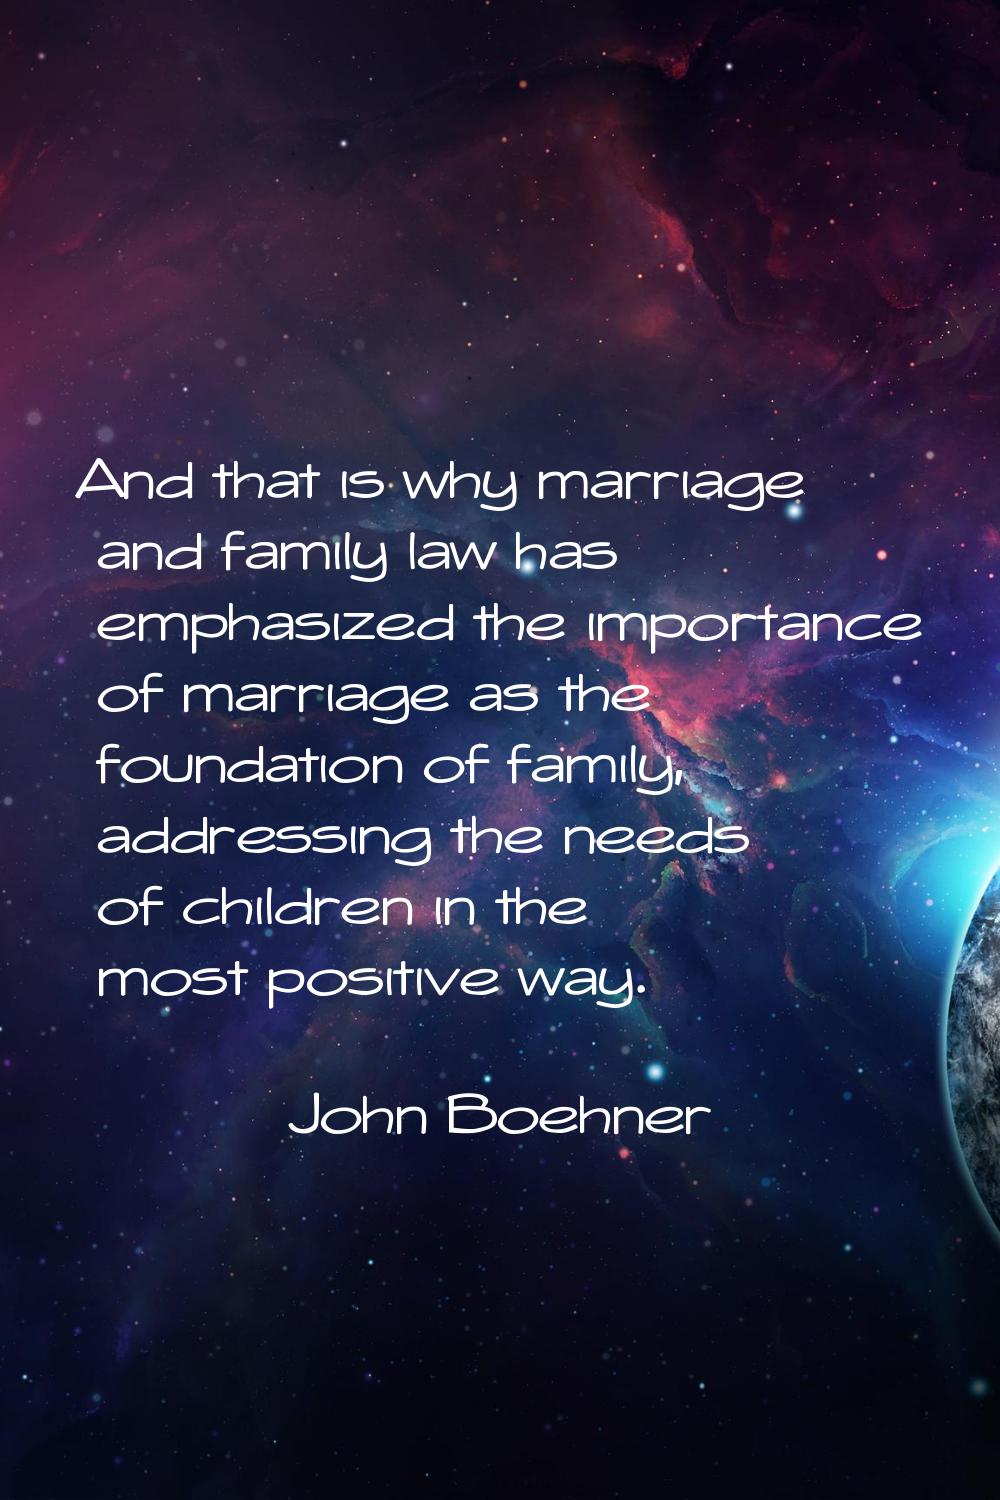 And that is why marriage and family law has emphasized the importance of marriage as the foundation